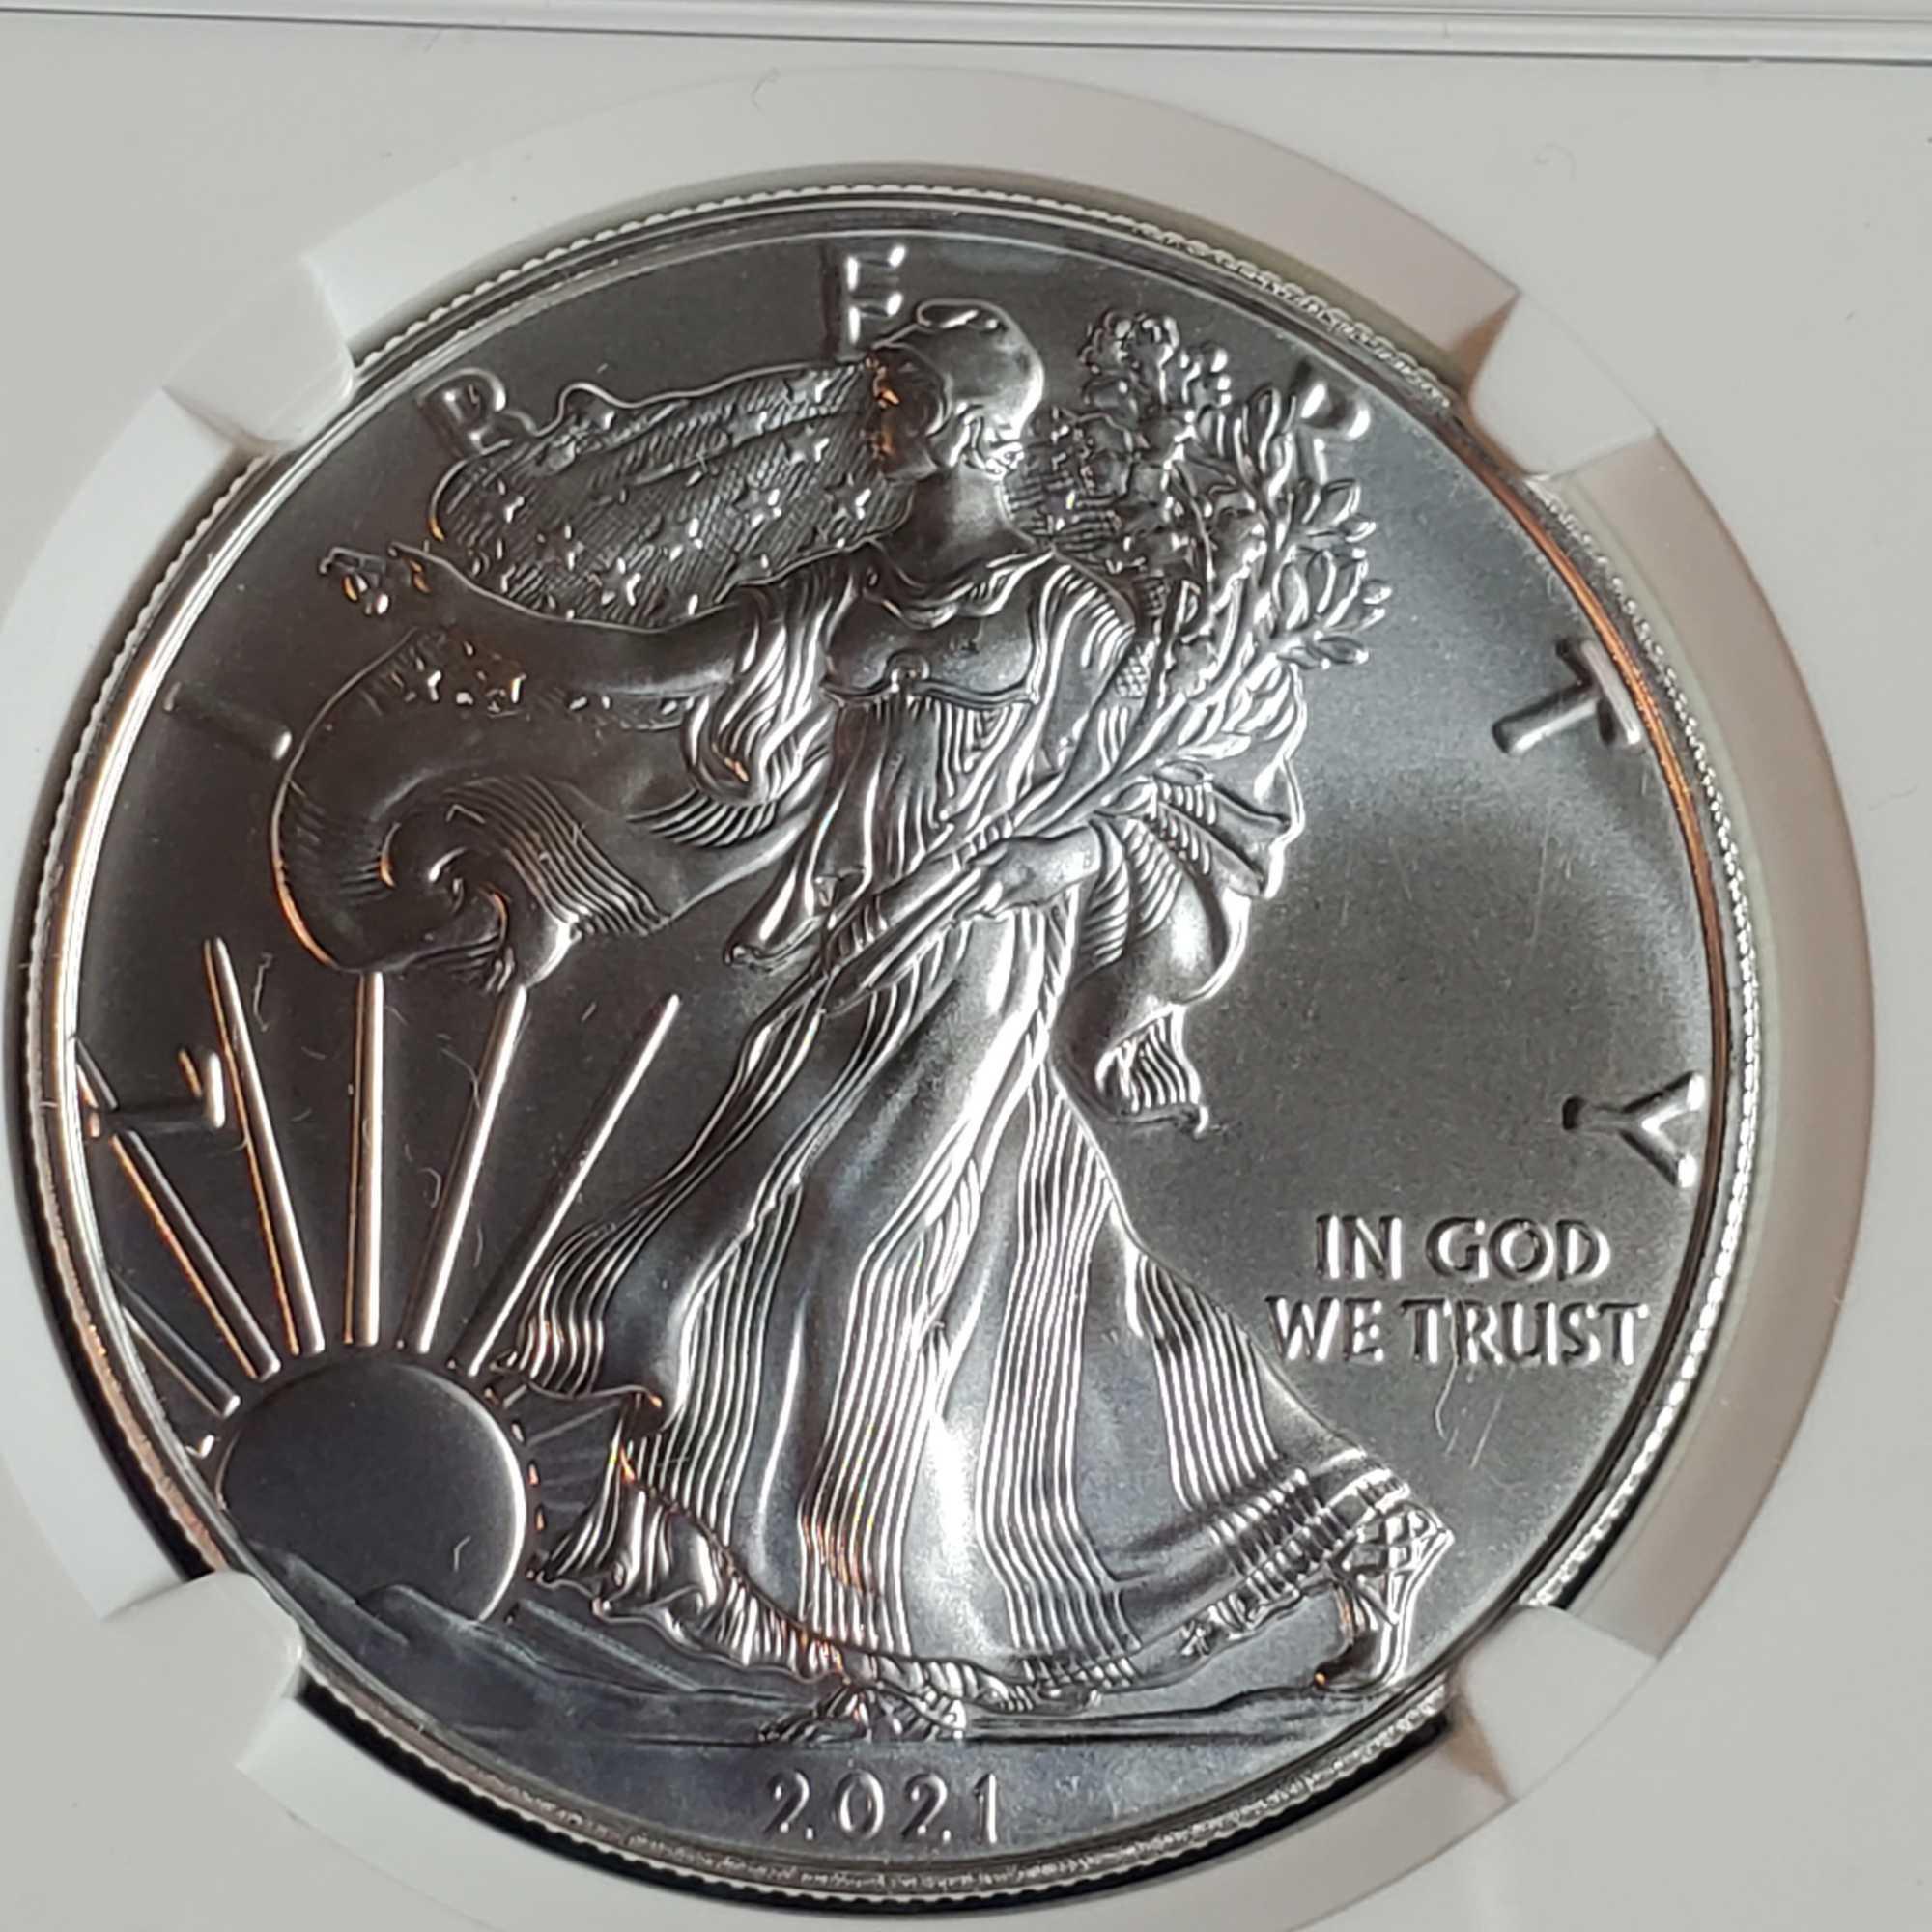 2 MS 69 NGC Silver American Eagle 1 Troy Oz .999 Silver Coins -1987 and 2021